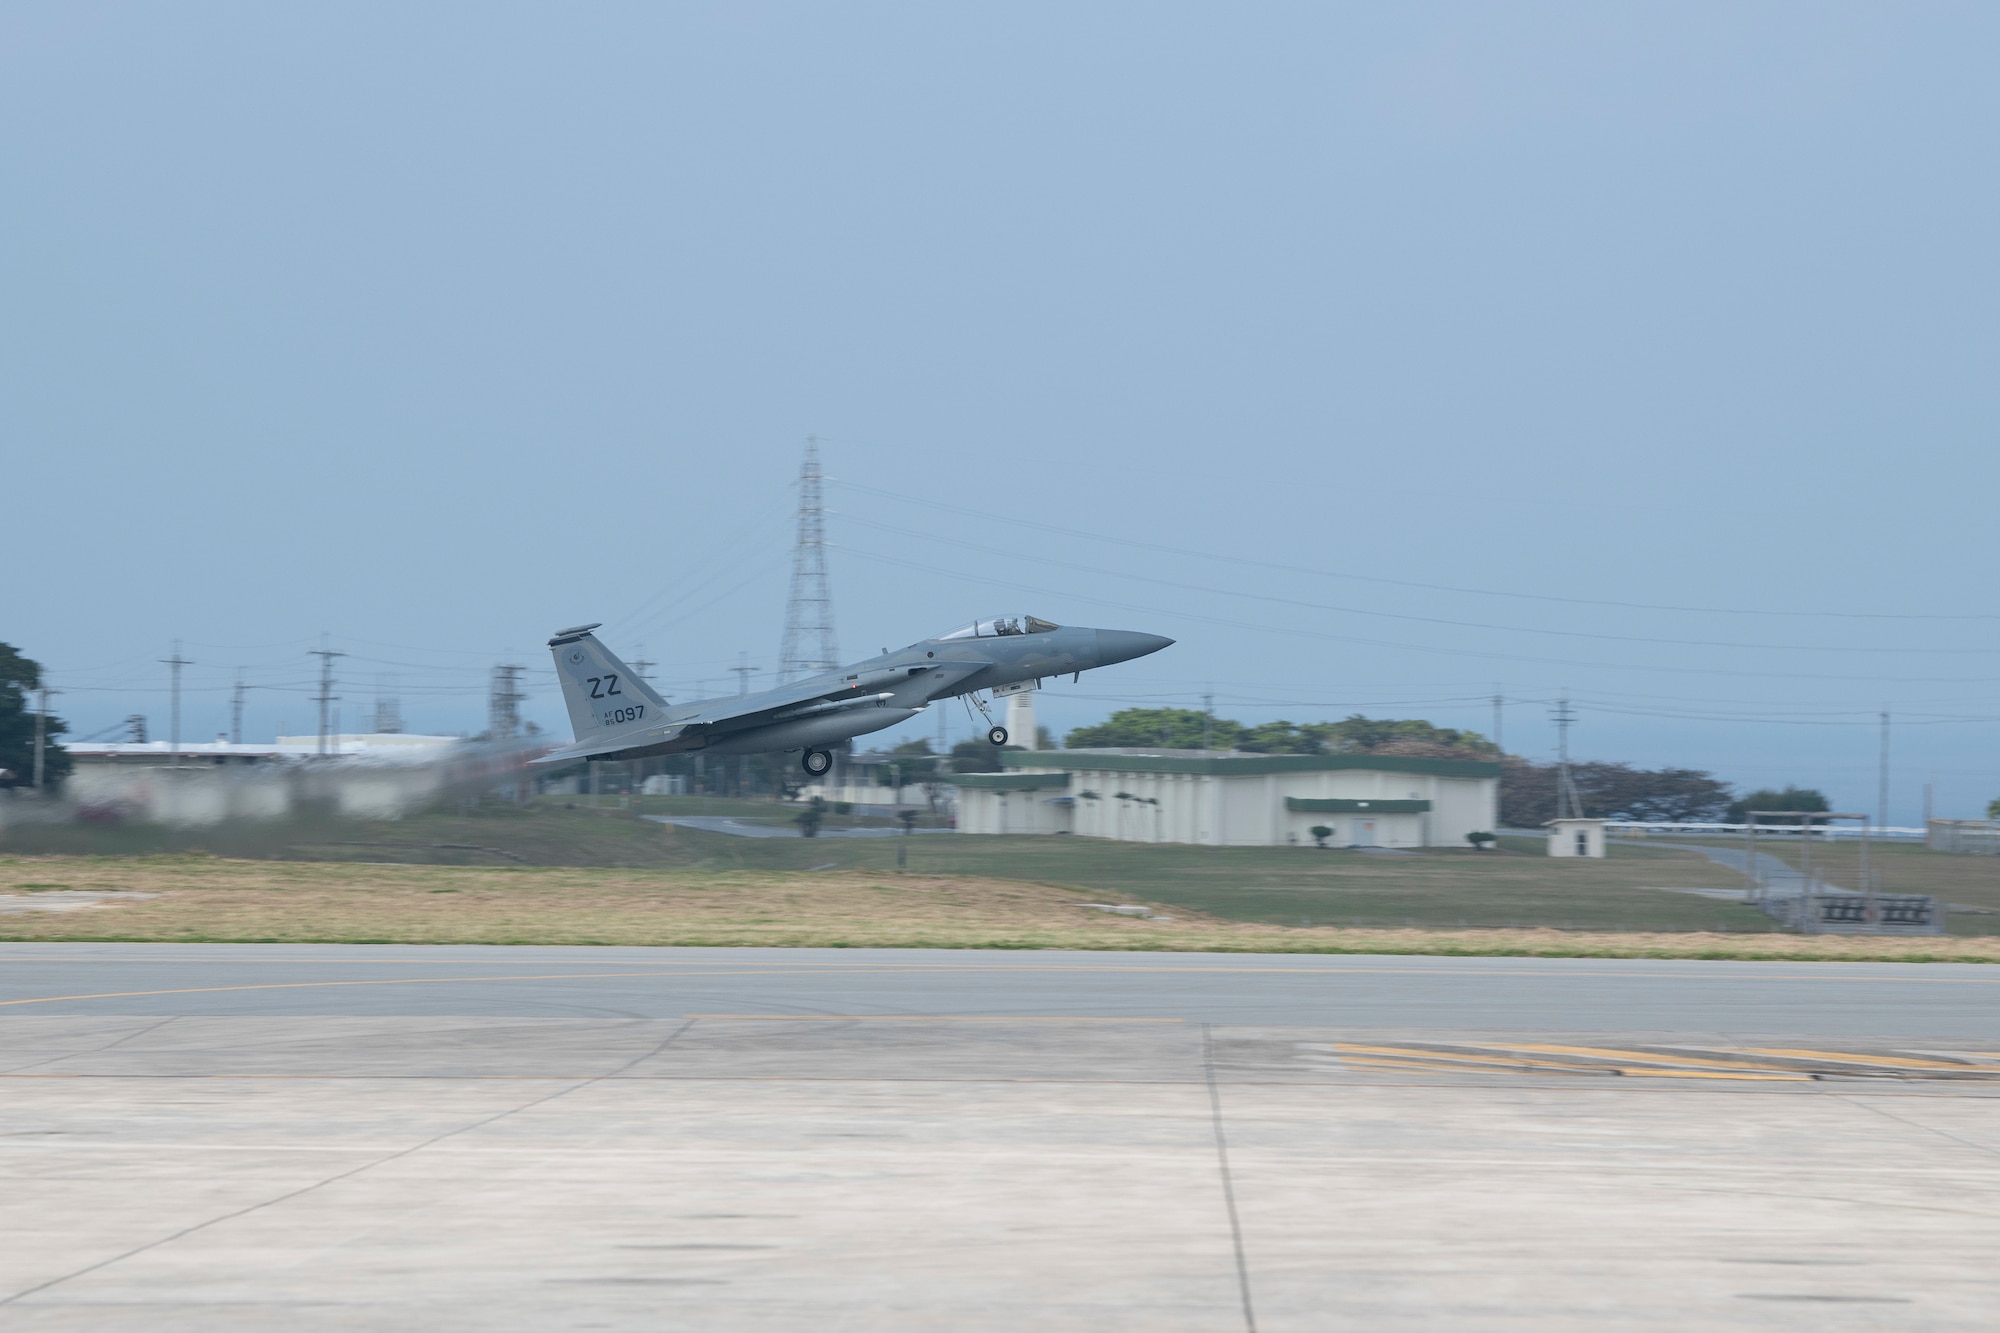 A U.S. Air Force F-15C Eagle, from Kadena Air Base, Japan, takes off during an Agile Combat Employment exercise Feb. 21, 2020, at Marine Corps Air Station Futenma, Japan. Exercises that utilize ACE concepts ensure forward-deployed forces in the Indo-Pacific are ready to protect and defend partners, allies and U.S. interests at a moment’s notice. (U.S. Air Force photo by Senior Airman Rhett Isbell)